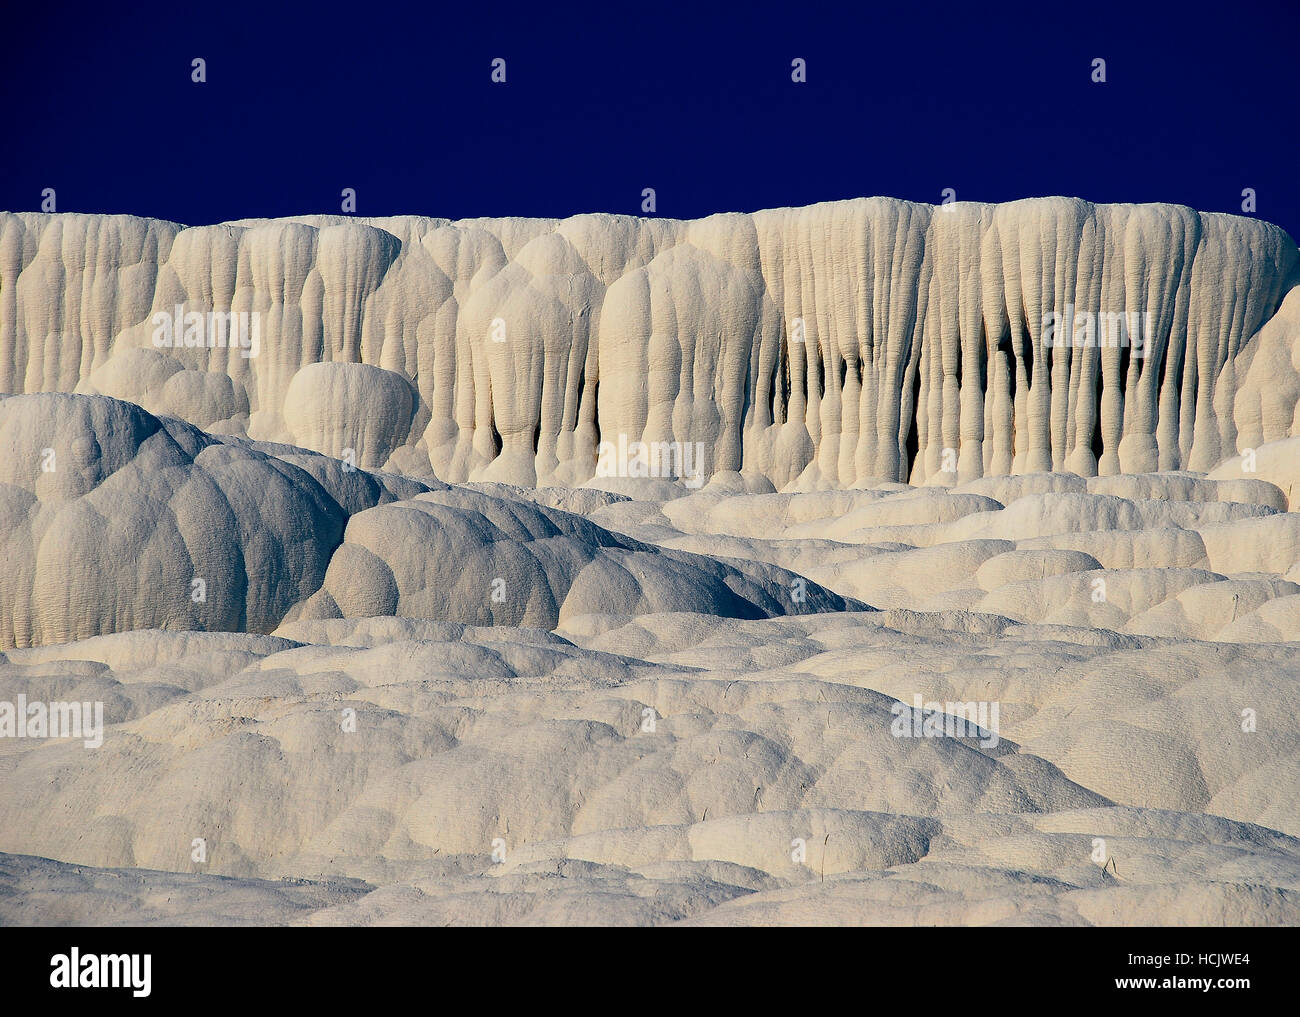 Calcareous rock formation in Pamukkale, Turkey. Stock Photo